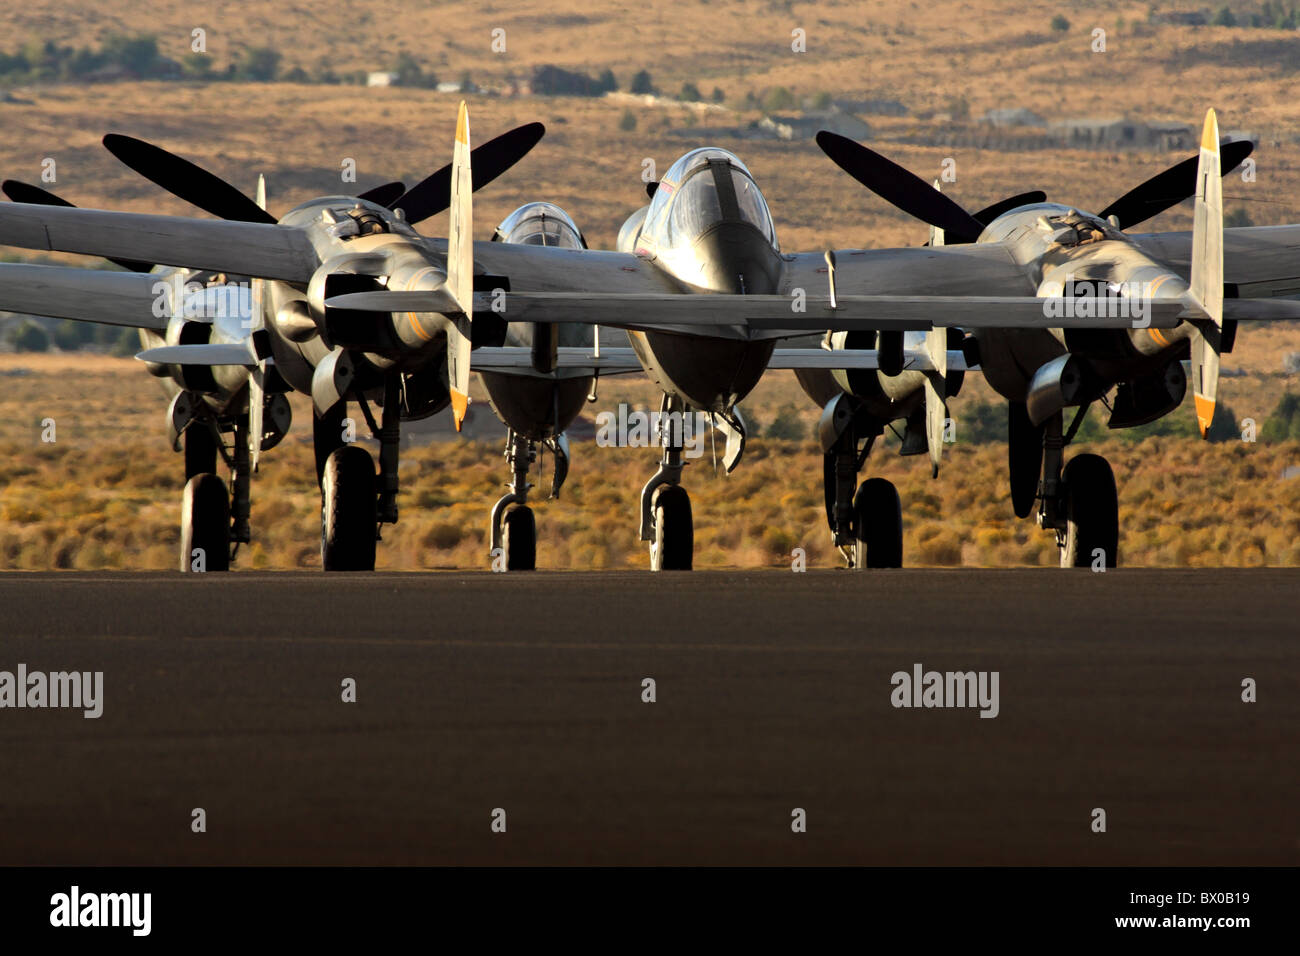 P-38 Lightning fighters on the ramp at Stead Field in Nevada. Stock Photo